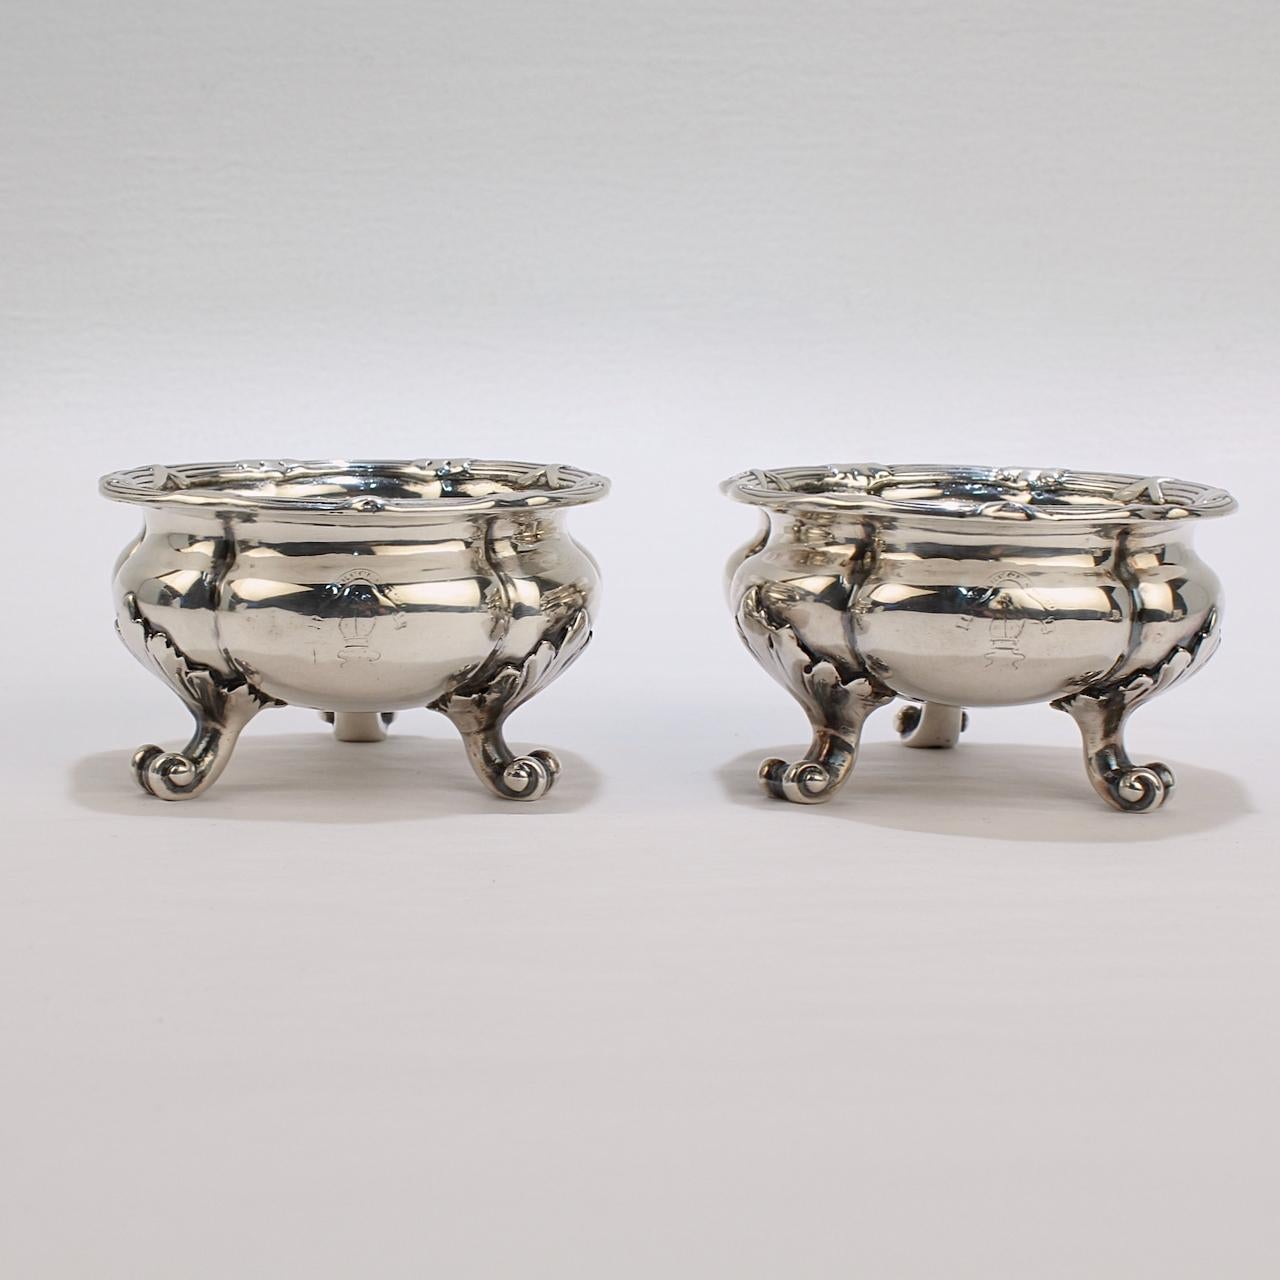 Early Victorian Pair of Crested English Victorian Sterling Silver Salt Cellars by Hunt & Roskell For Sale